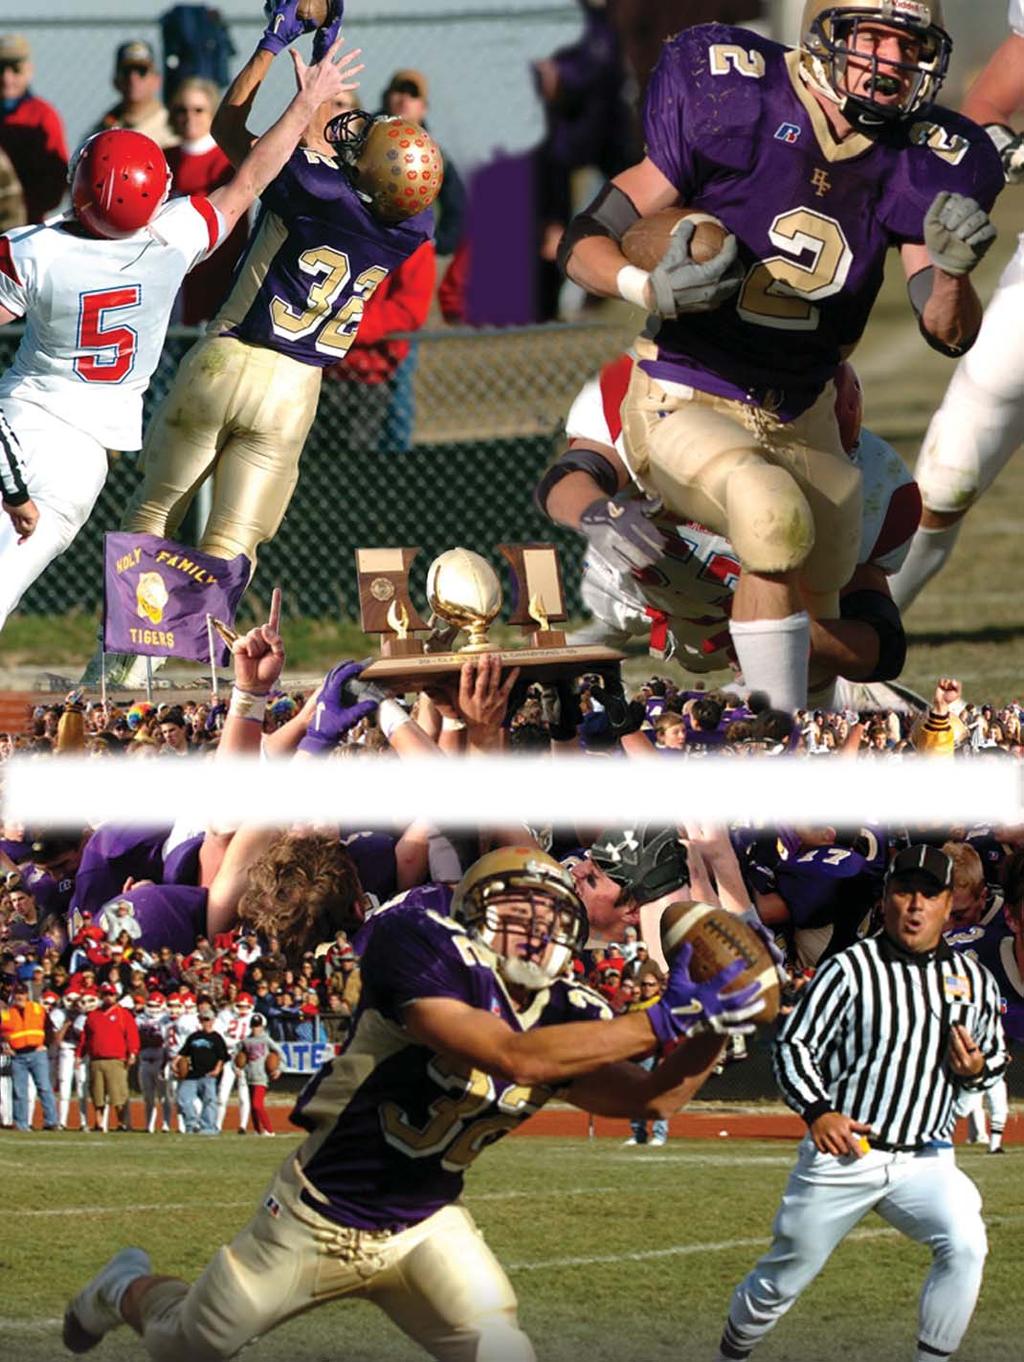 BFS SUCCESS STORY TheTigers Roar to the Top Tigers BY MATT GILMER, CLASS OF 2007 TOP LEFT & BOTTOM CENTER: